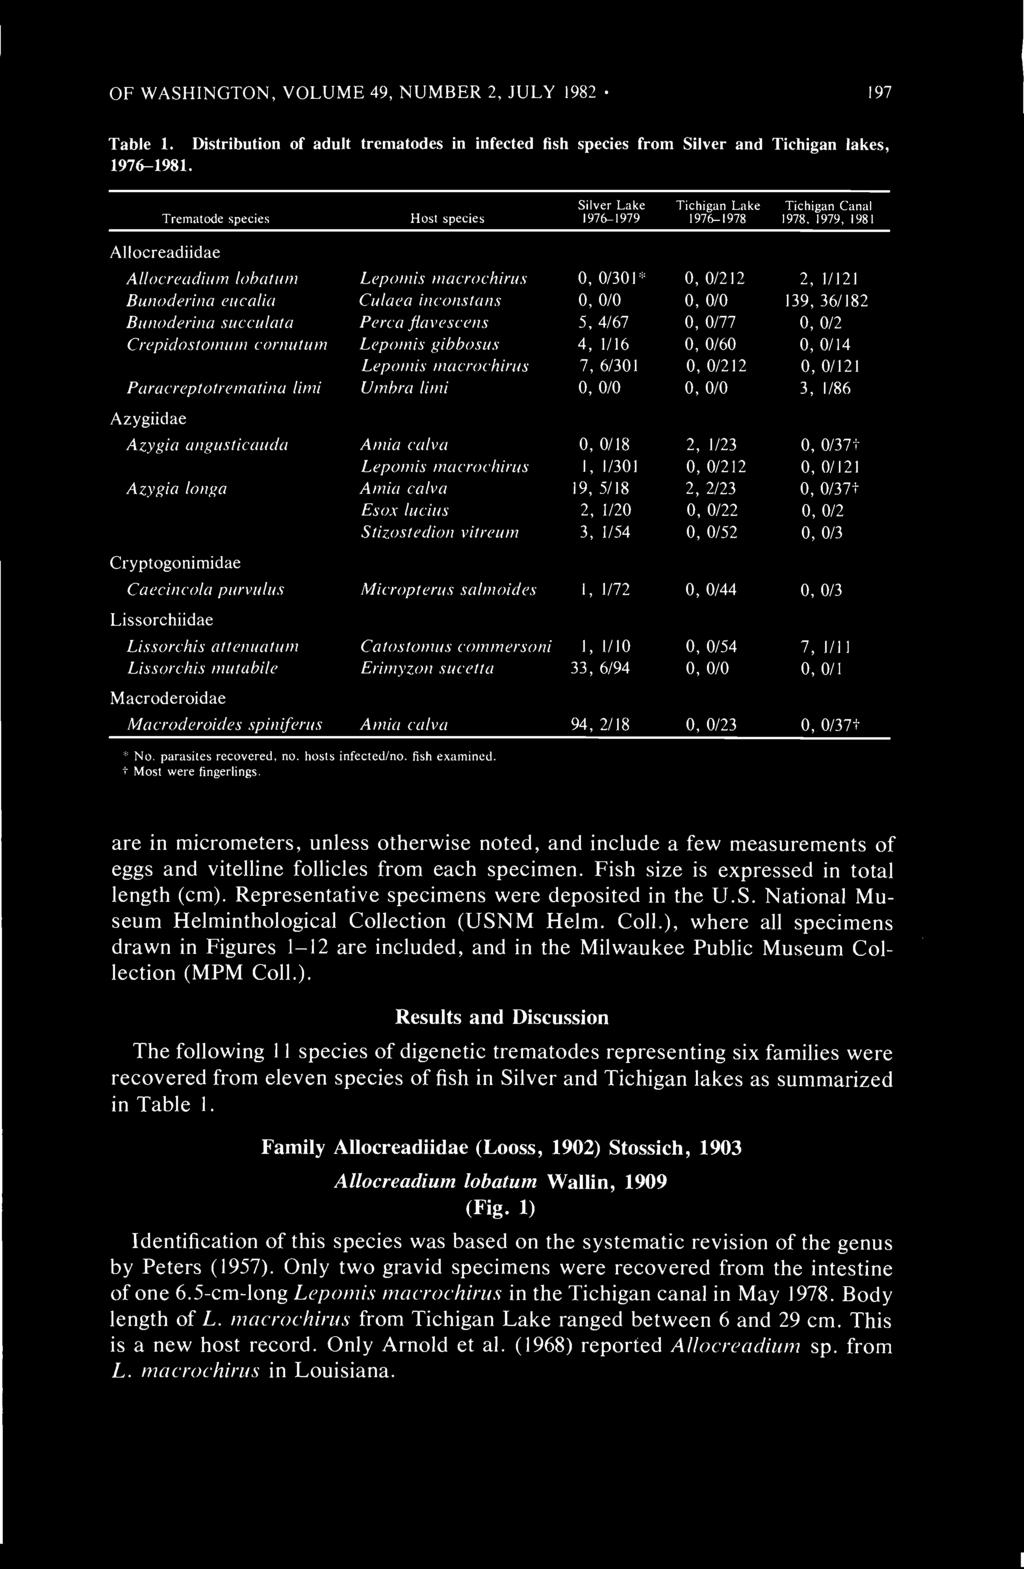 OF WASHINGTON, VOLUME 49, NUMBER 2, JULY 1982 197 Table 1. Distribution of adult trematodes in infected fish species from Silver and Tichigan lakes, 1976-1981.